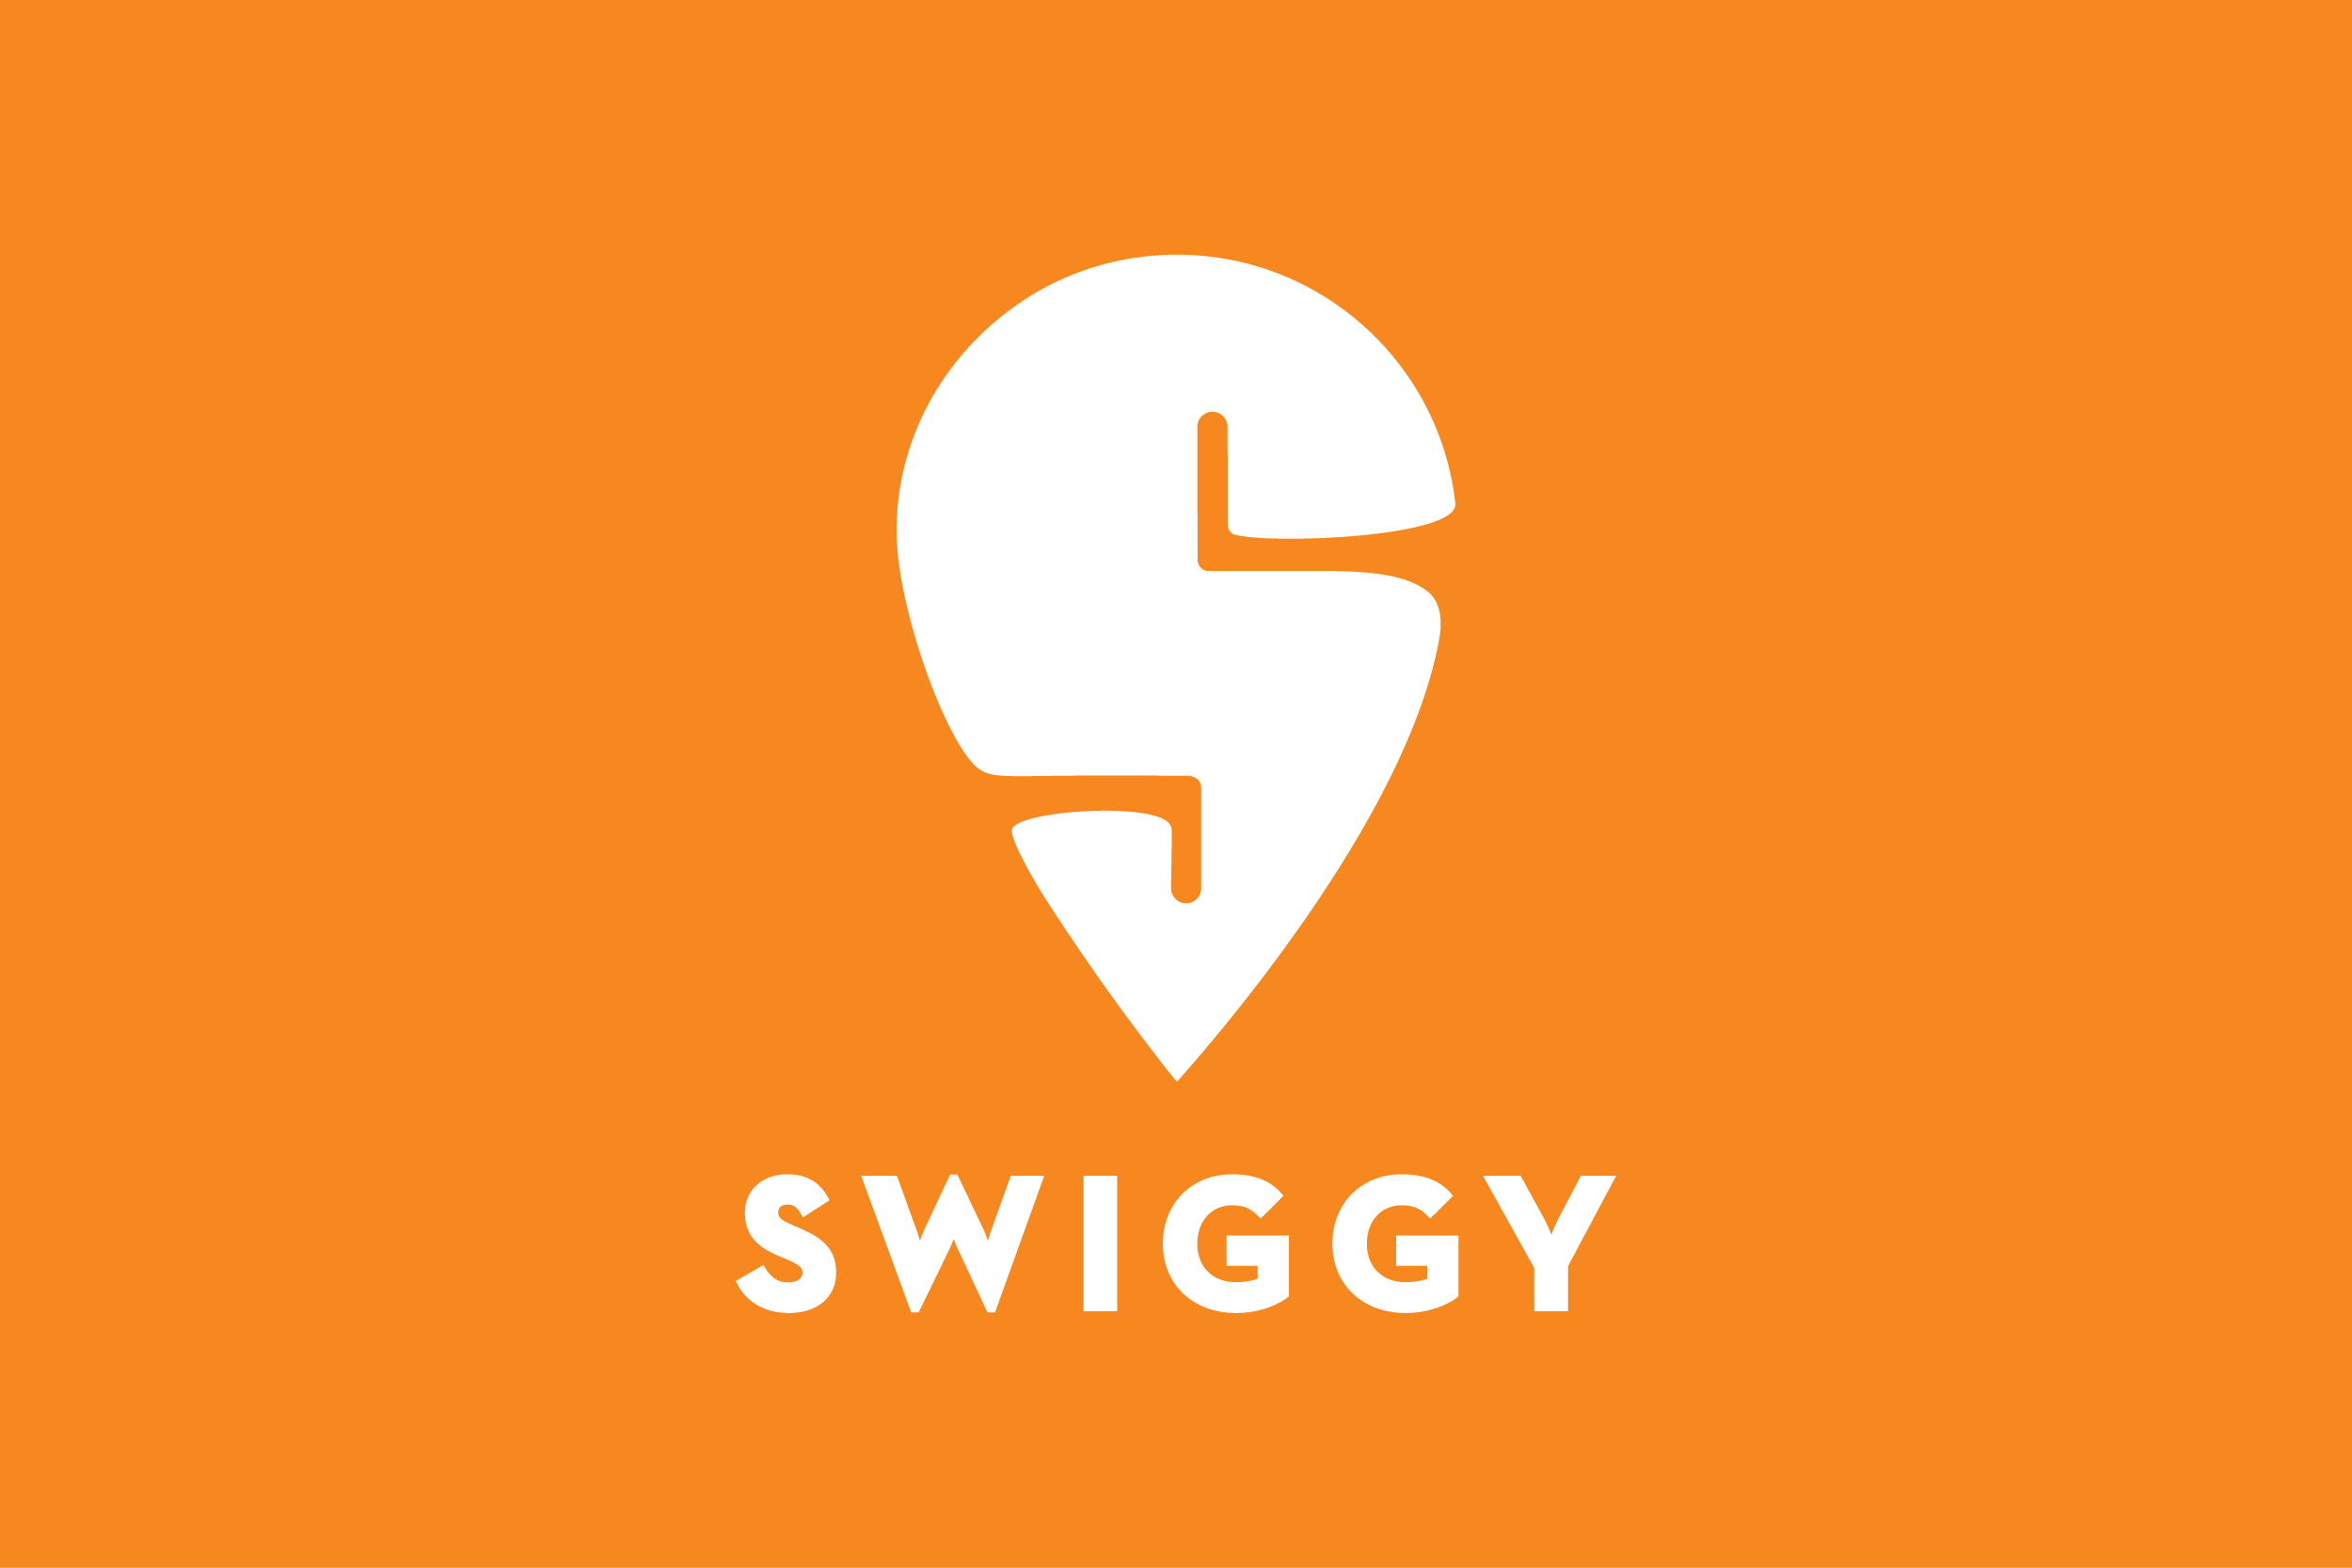 Swiggy denies company fudged numbers as claimed by anonymous blog post